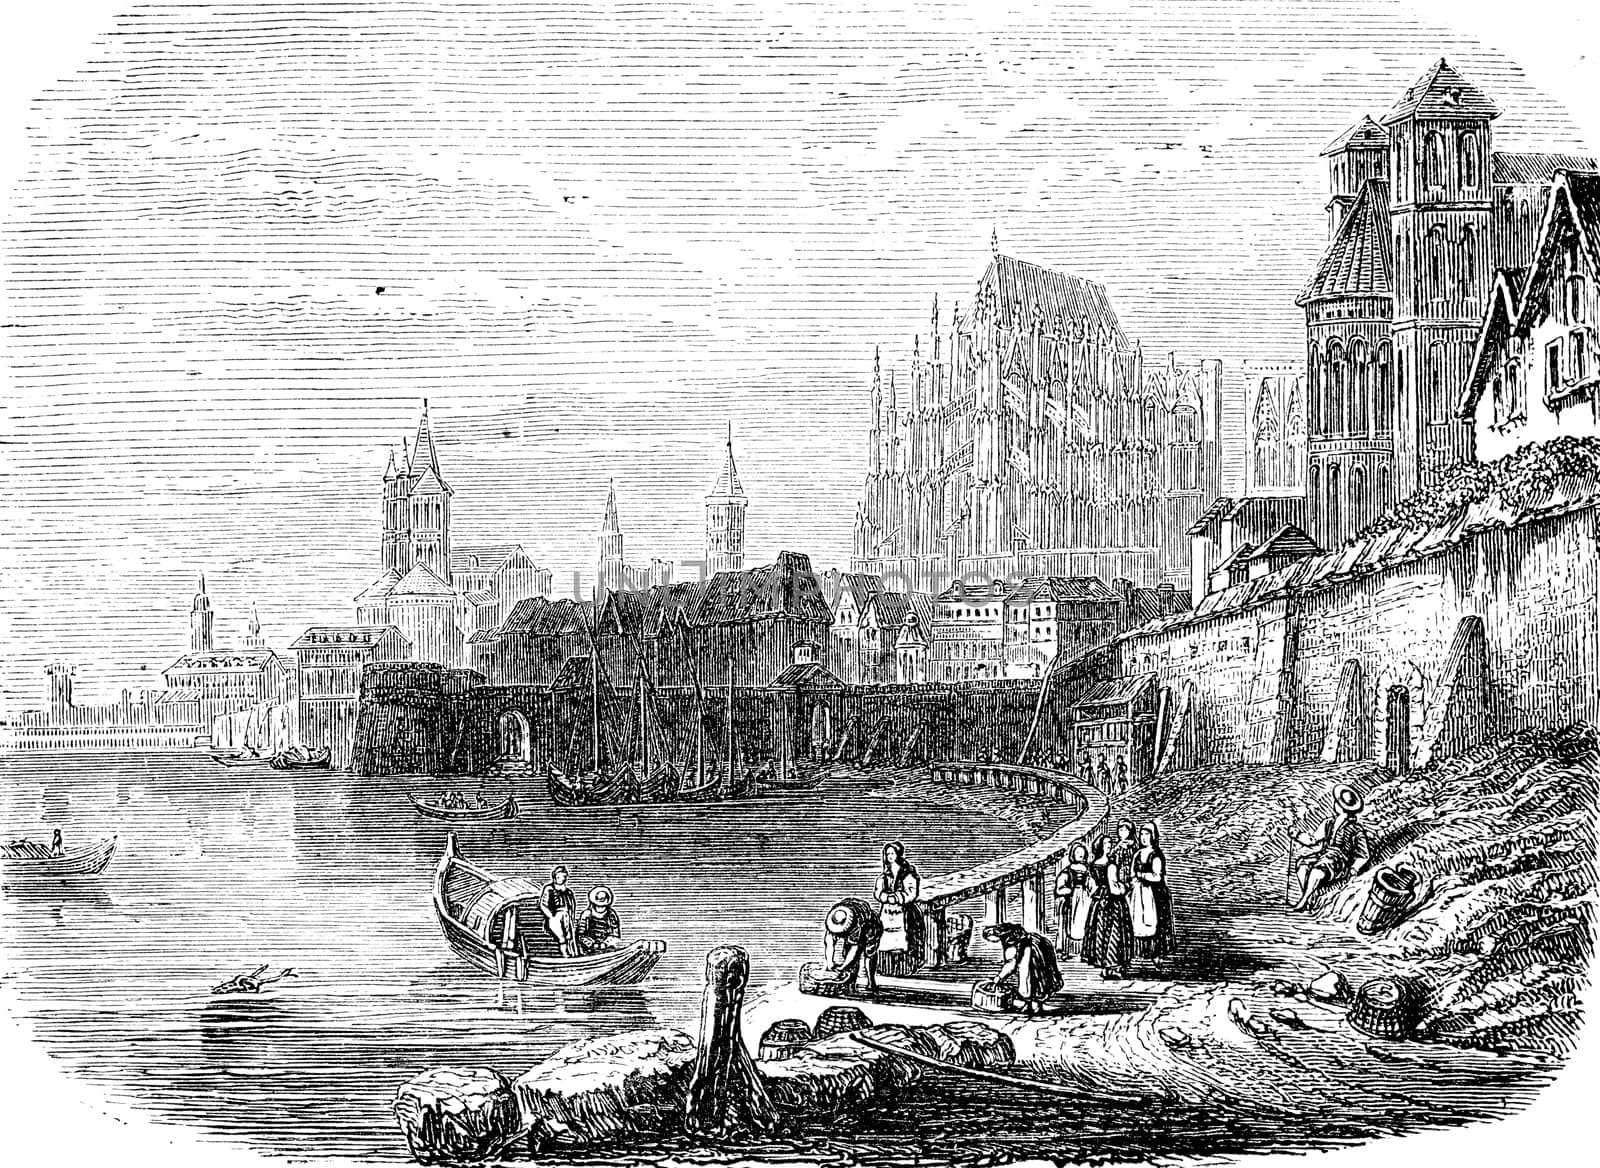 Cologne, vintage engraved illustration. From Chemin des Ecoliers, 1861.
